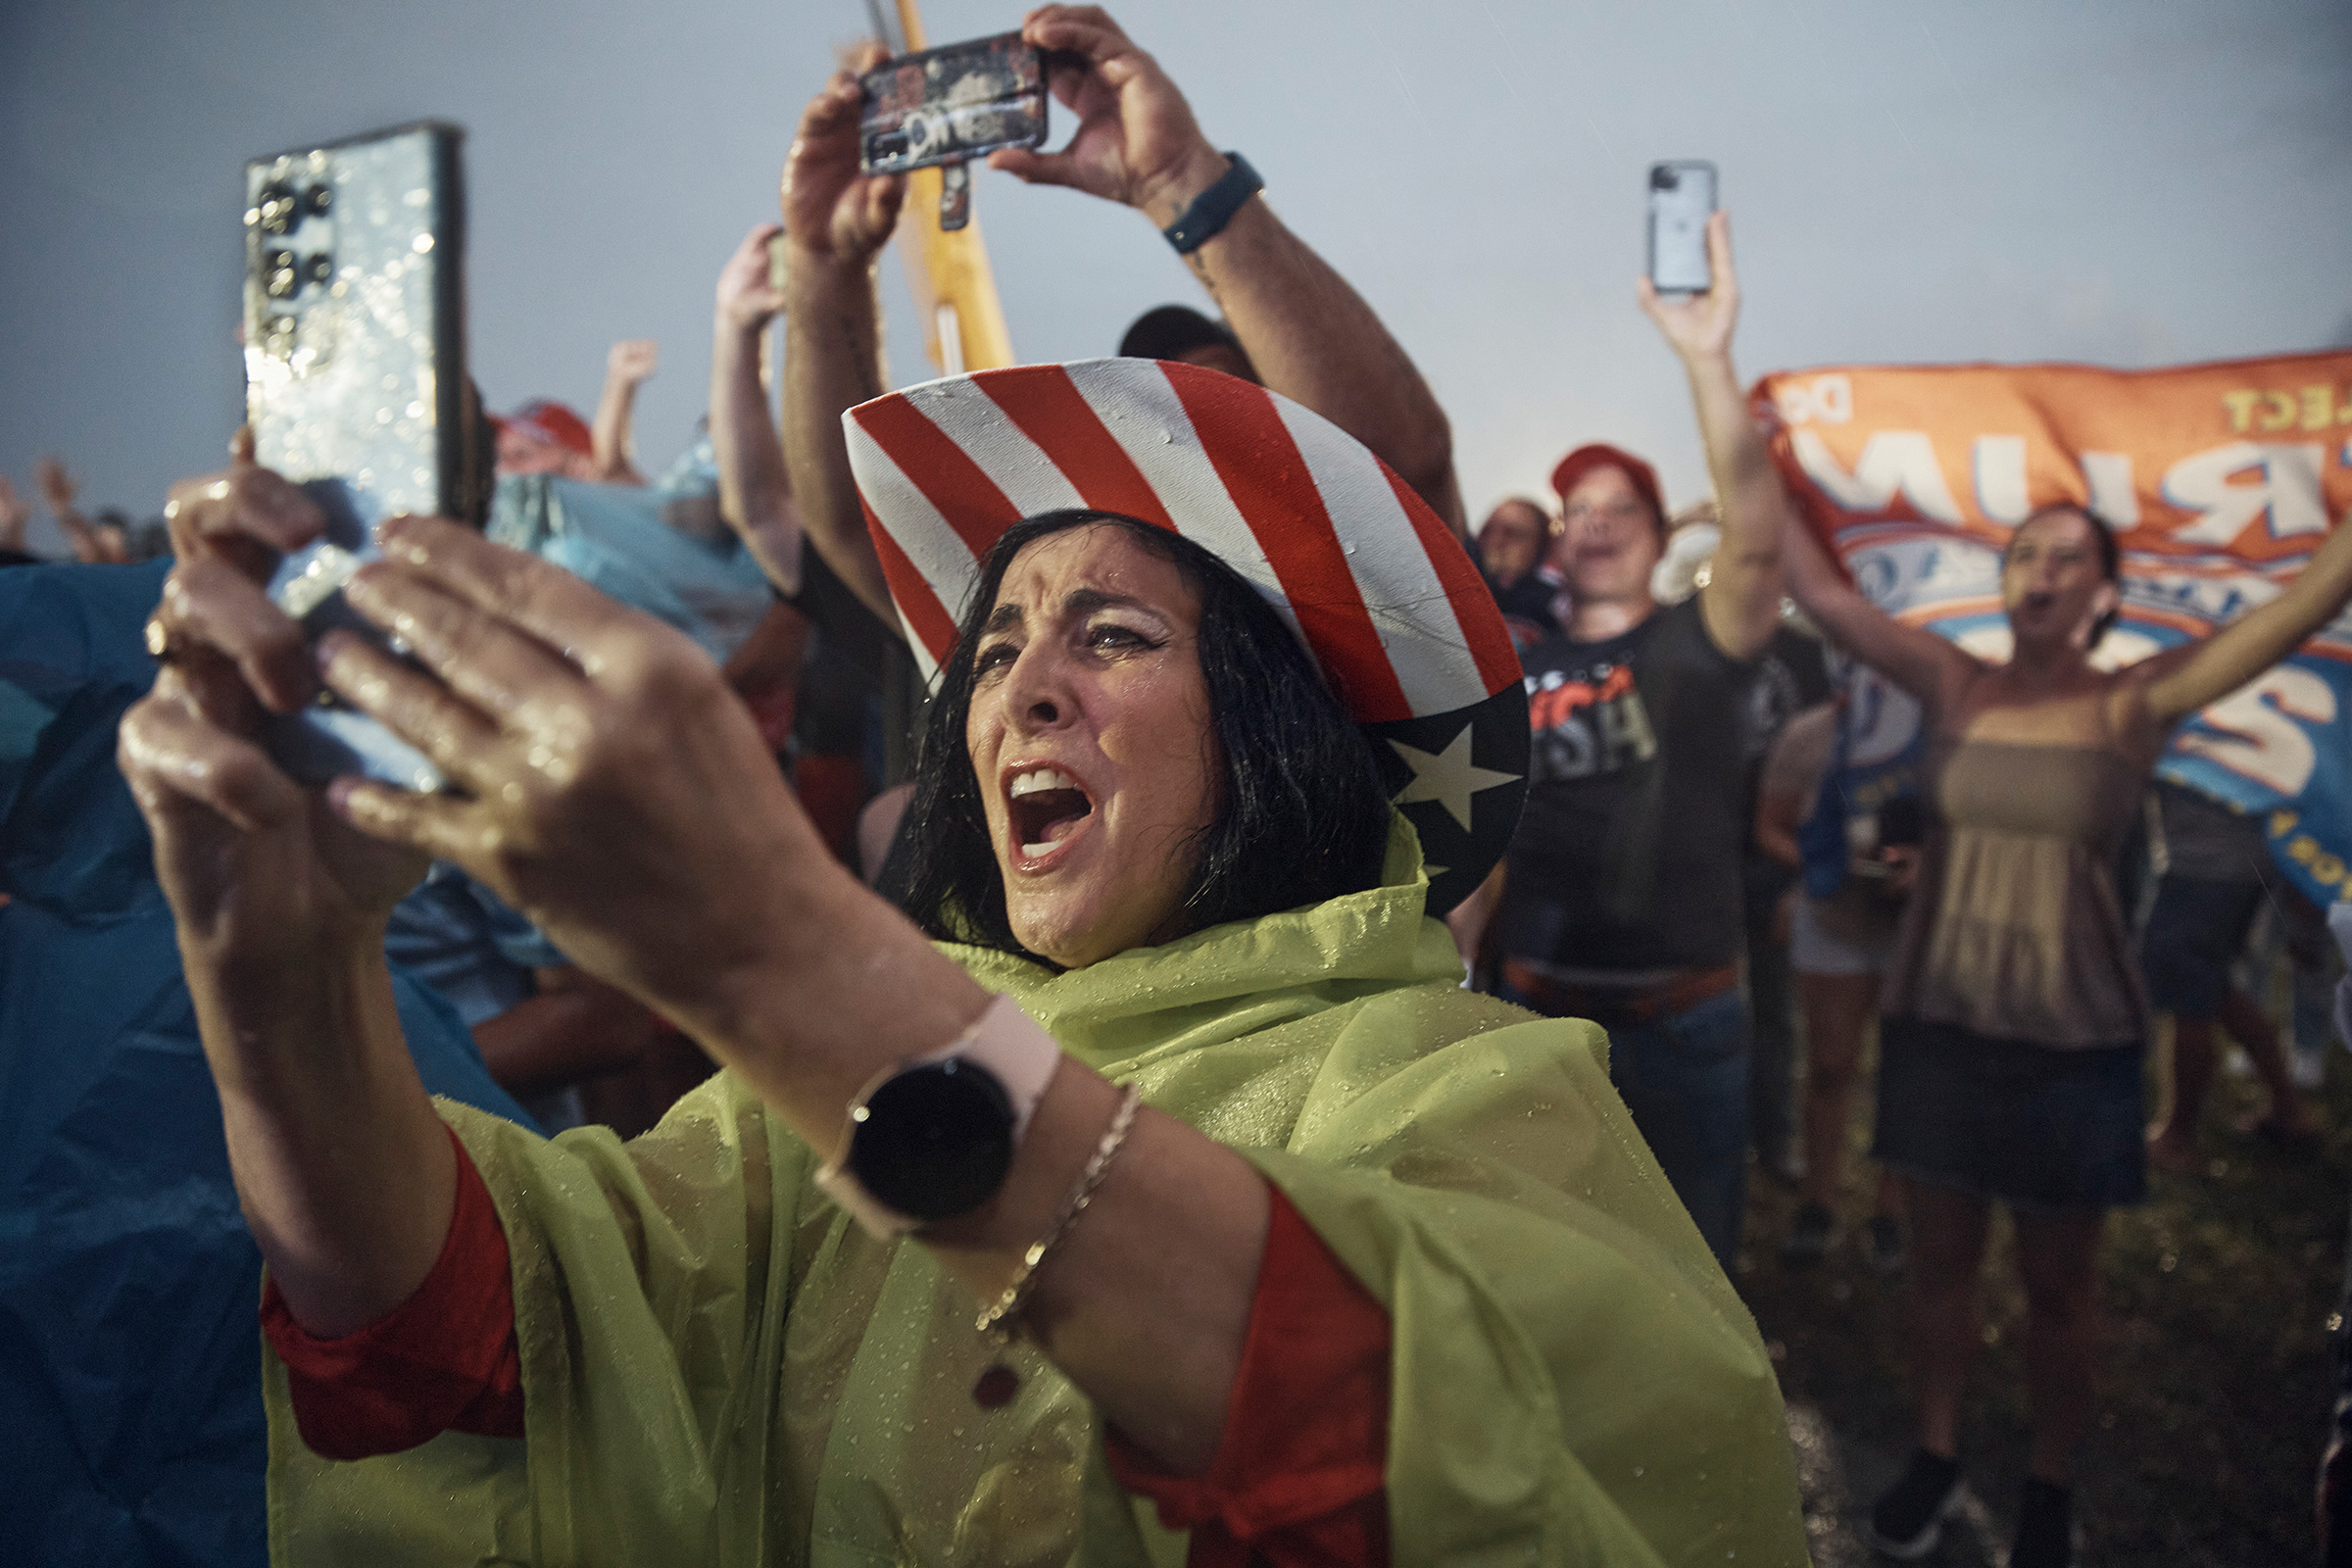 Supporters cheer as it rains on a Trump rally in Miami (Andres Kudacki for TIME)